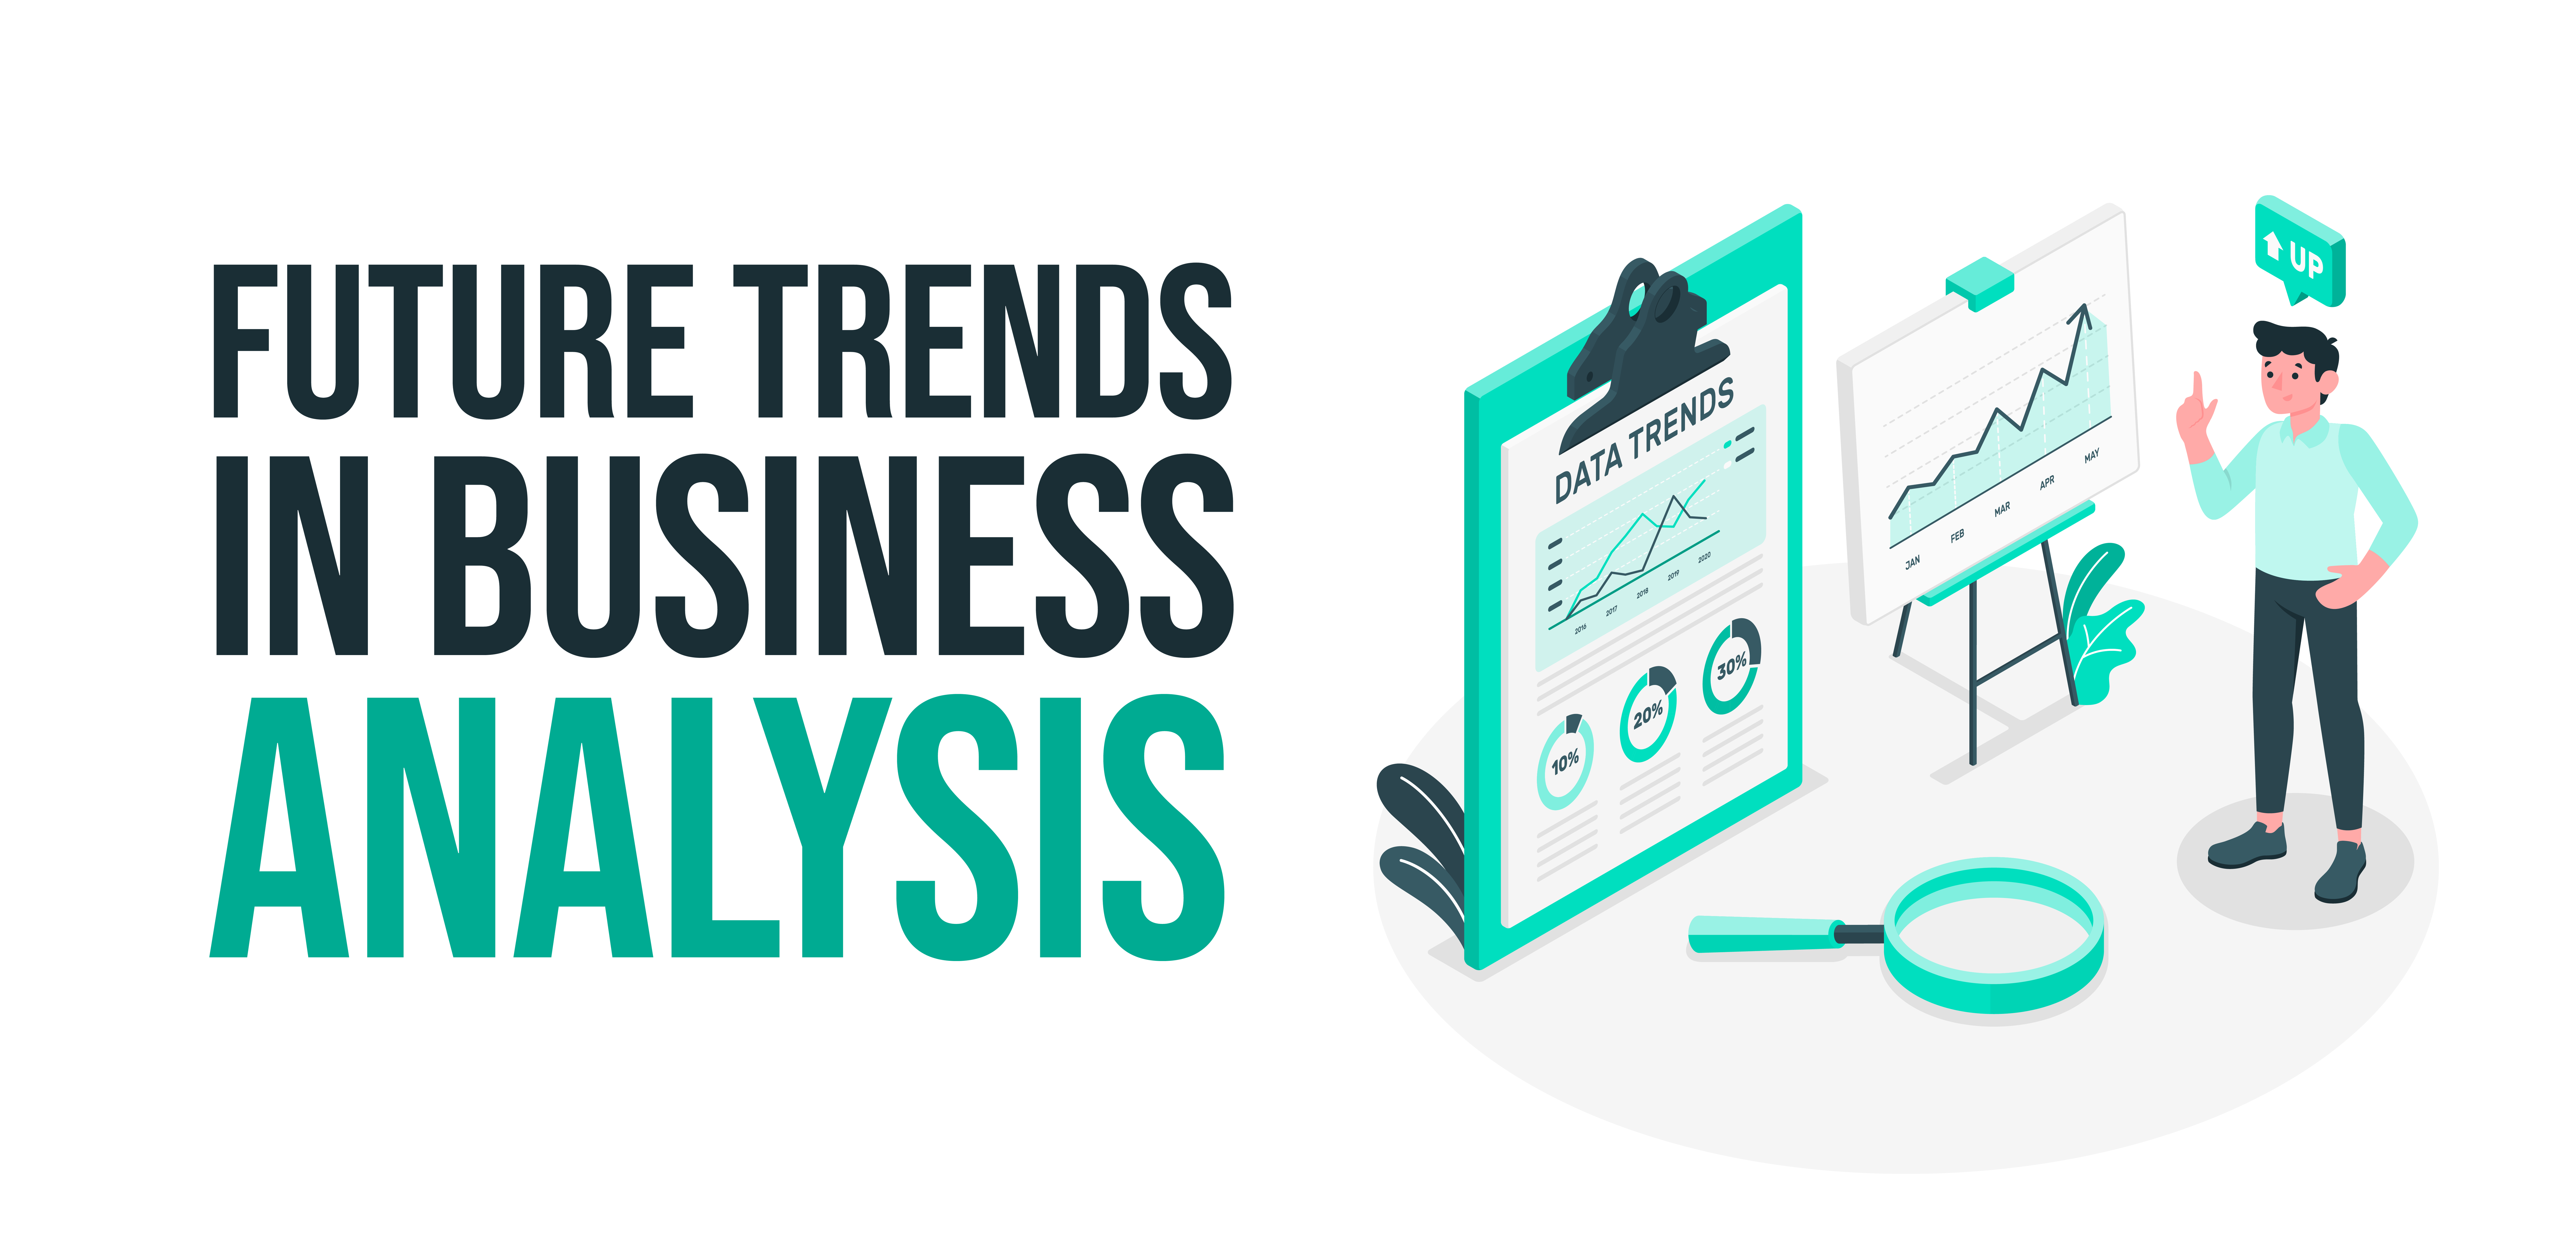 Future Trends in Business Analysis